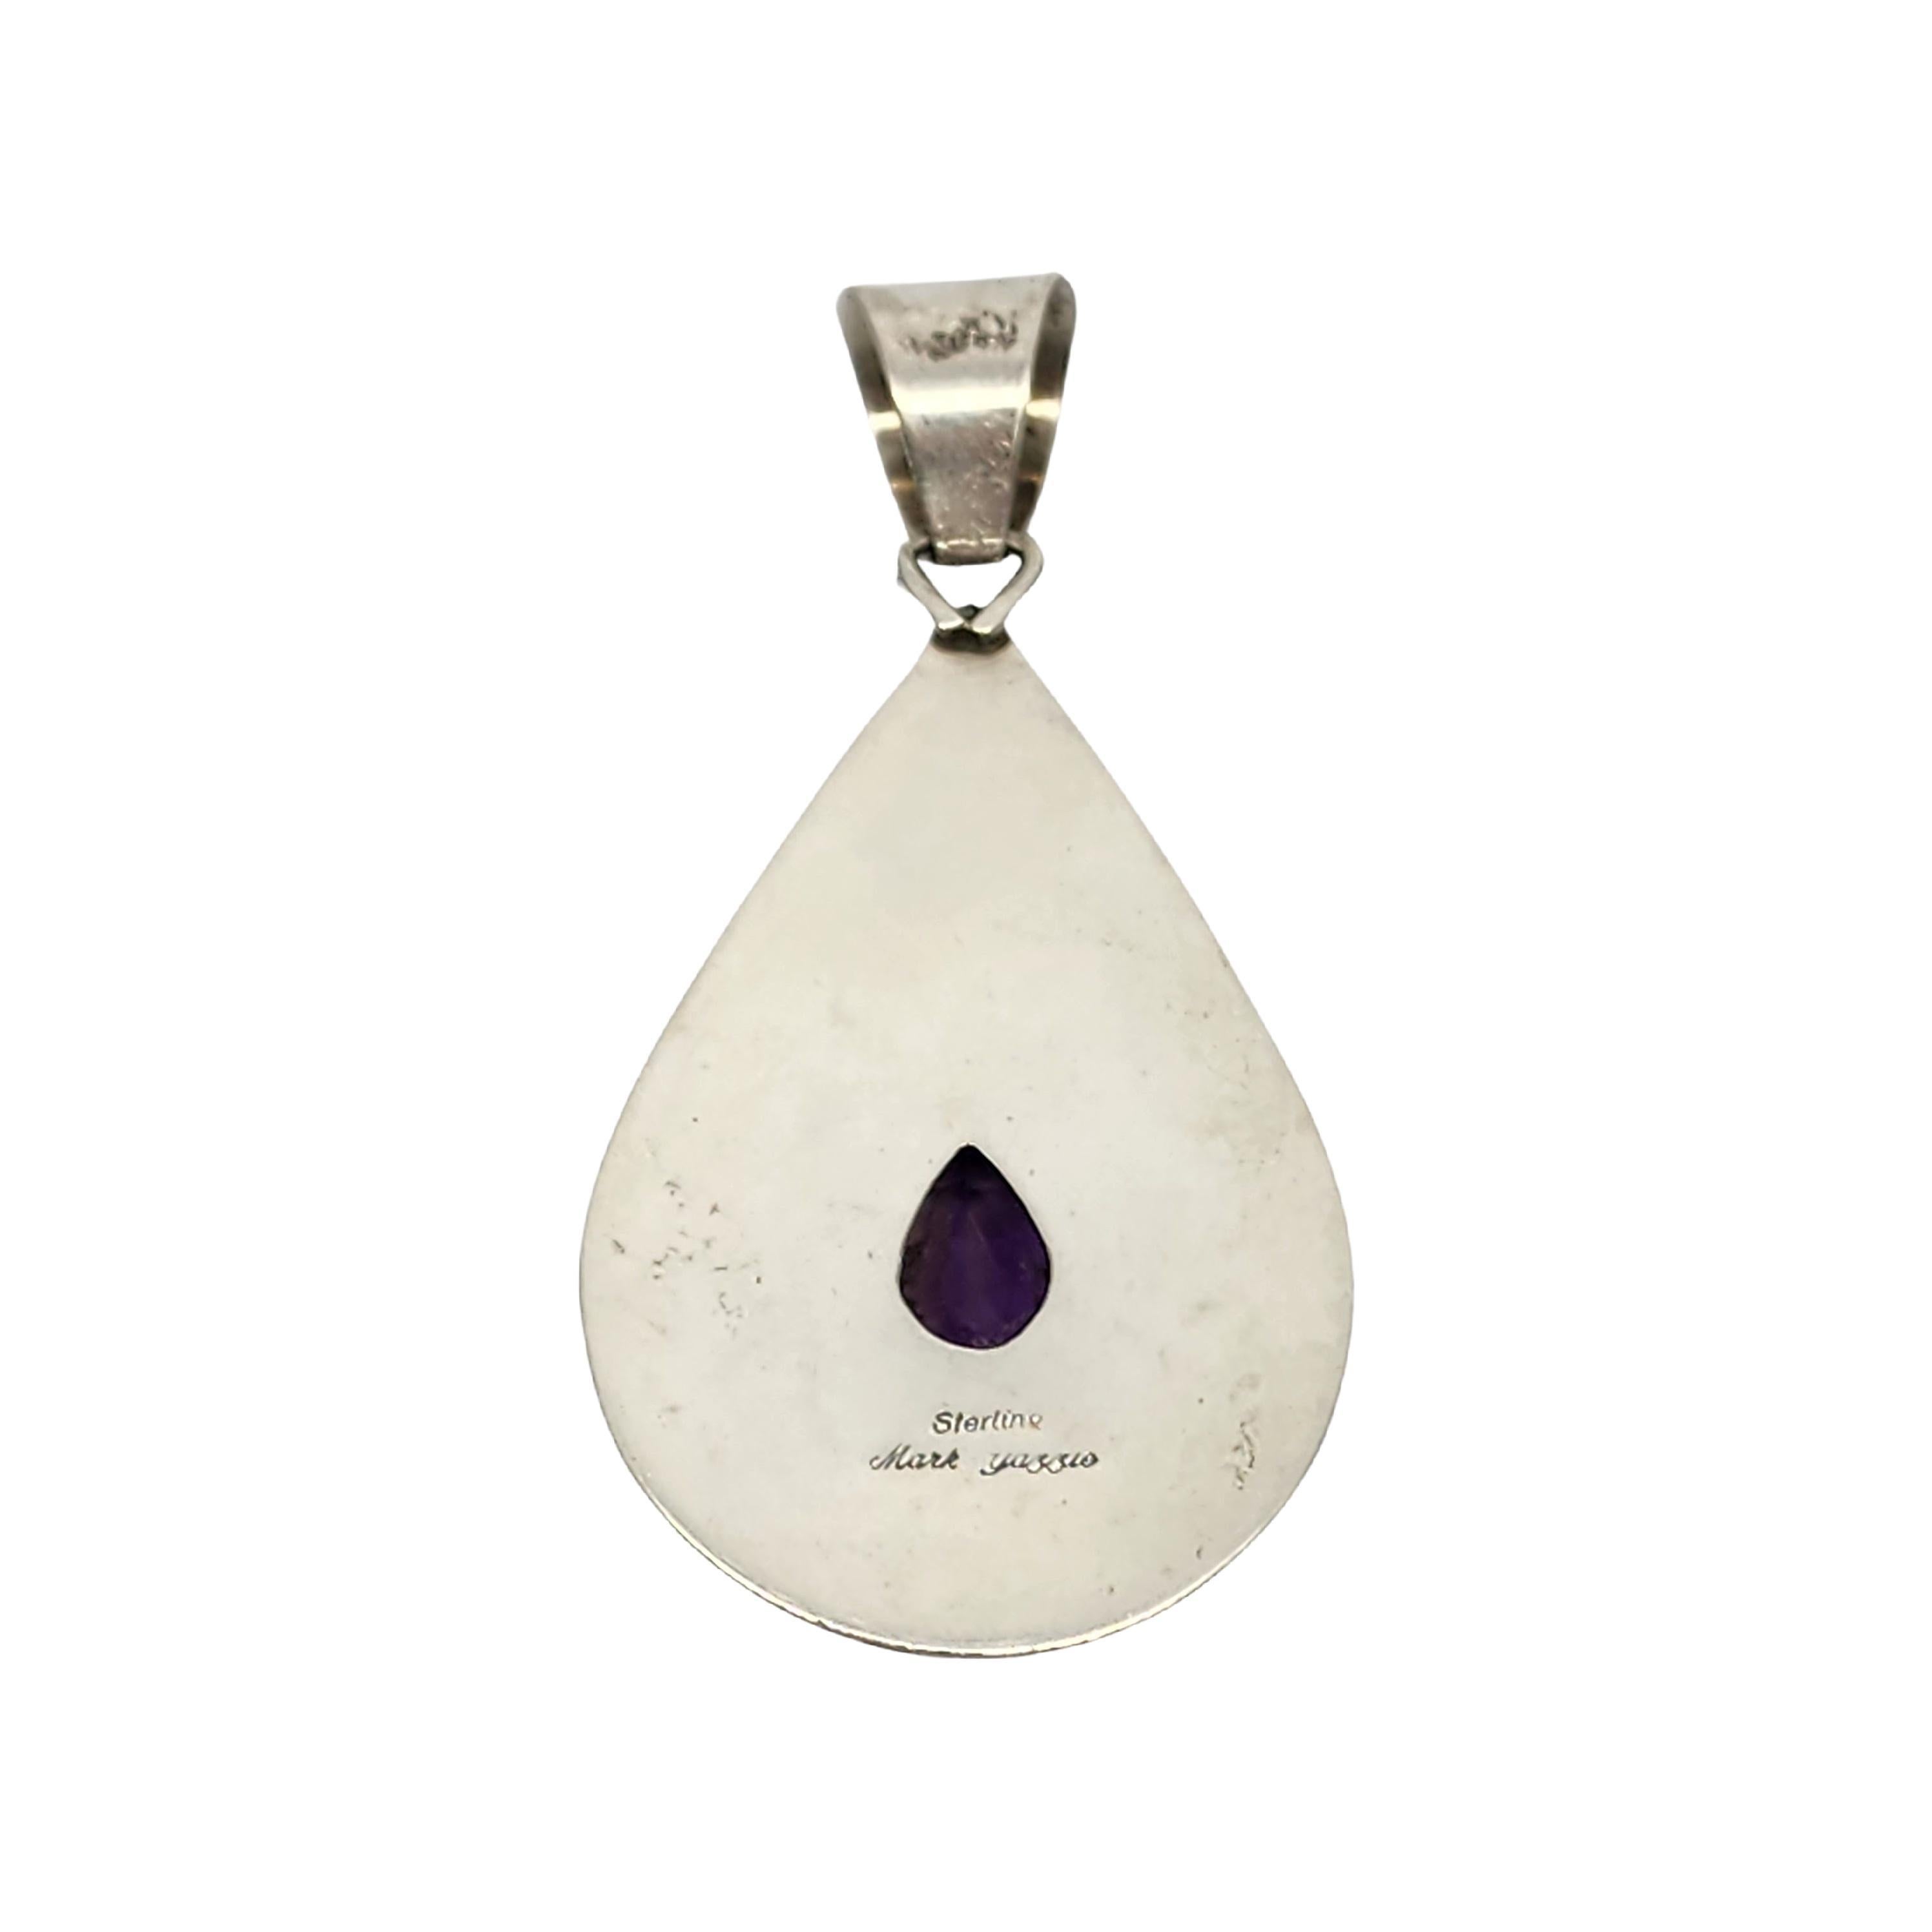 Sterling silver amethyst teardrop pendant by Native American Navajo artisan, Mark Yazzie.

Large teardrop pendant with Native American symbols: feathers, bear claws and mountains. Faceted tear drop purple amethyst is prong set it the pendant's